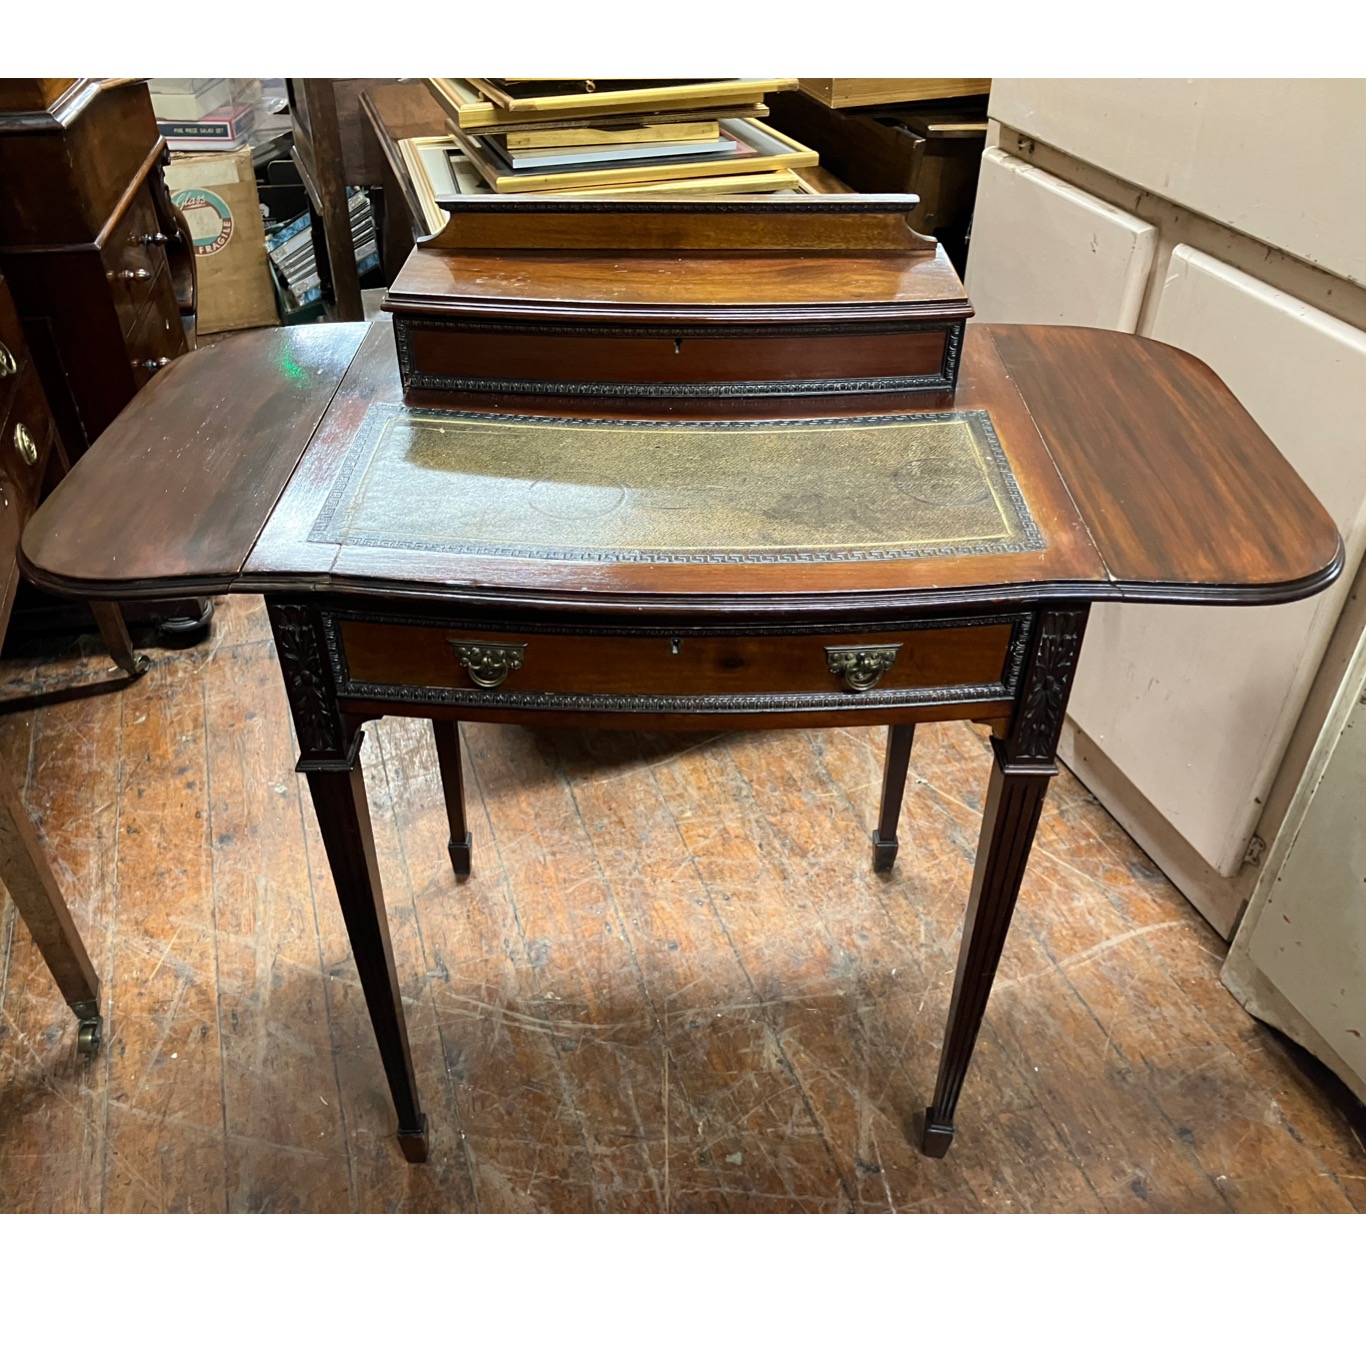 20th Century small leather topped writing desk with drop leaf extentions.